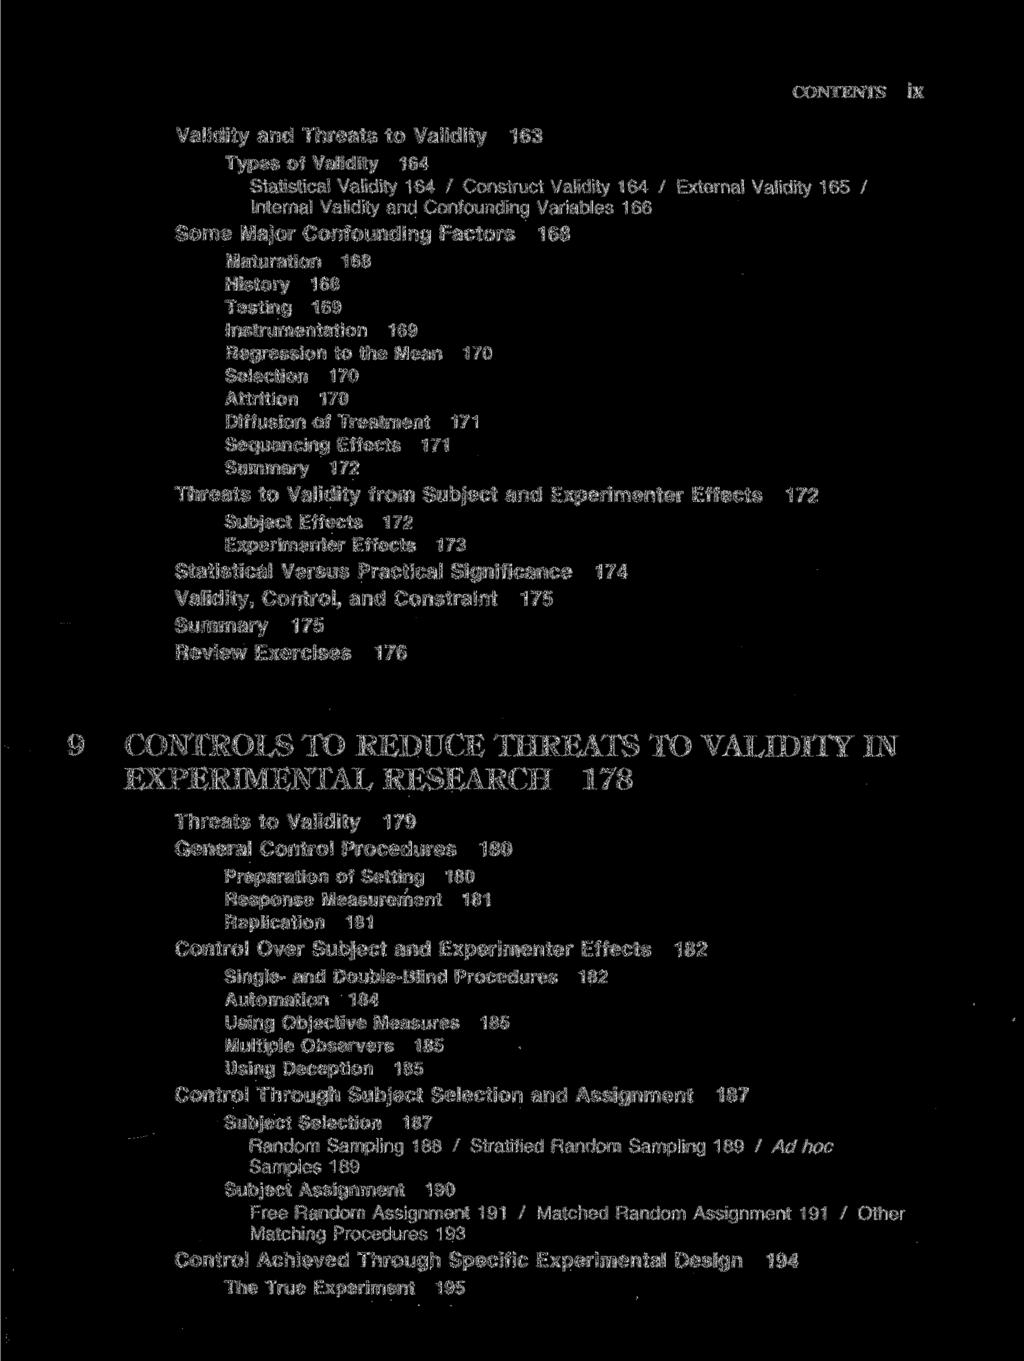 Validity and Threats to Validity 163 CONTENTS Types of Validity 164 Statistical Validity 164 / Construct Validity 164 / External Validity 165 / Internal Validity and Confounding Variables 166 Some